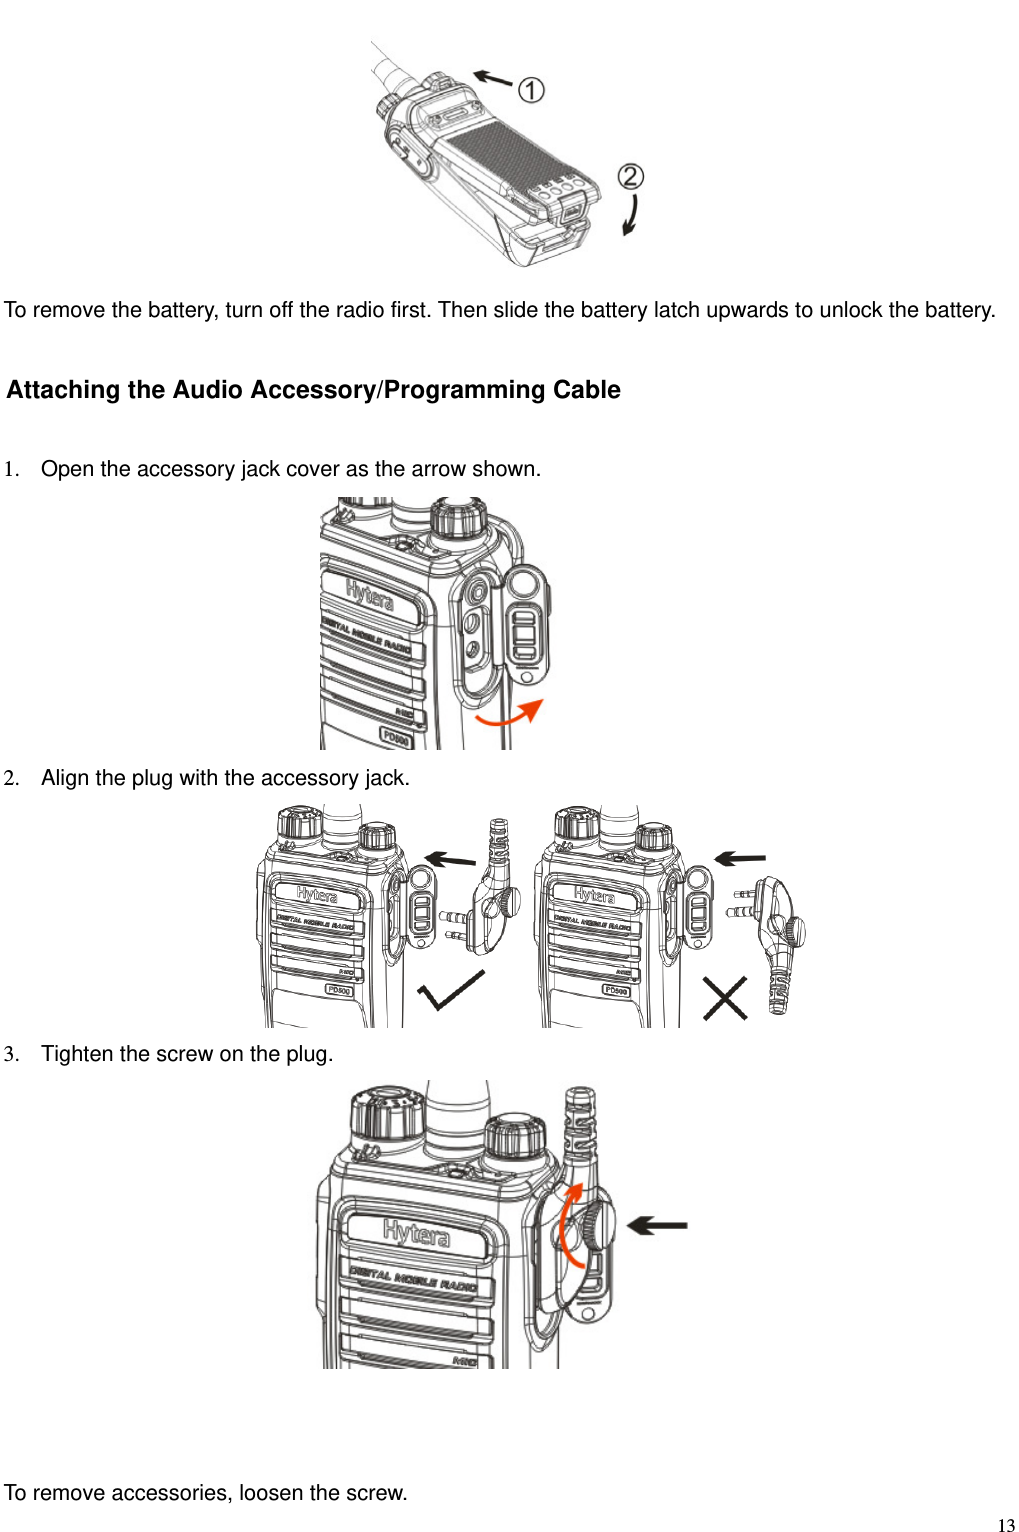                                                                                                              13 To remove the battery, turn off the radio first. Then slide the battery latch upwards to unlock the battery.   Attaching the Audio Accessory/Programming Cable 1.  Open the accessory jack cover as the arrow shown.  2.  Align the plug with the accessory jack.    3.  Tighten the screw on the plug.       To remove accessories, loosen the screw.   